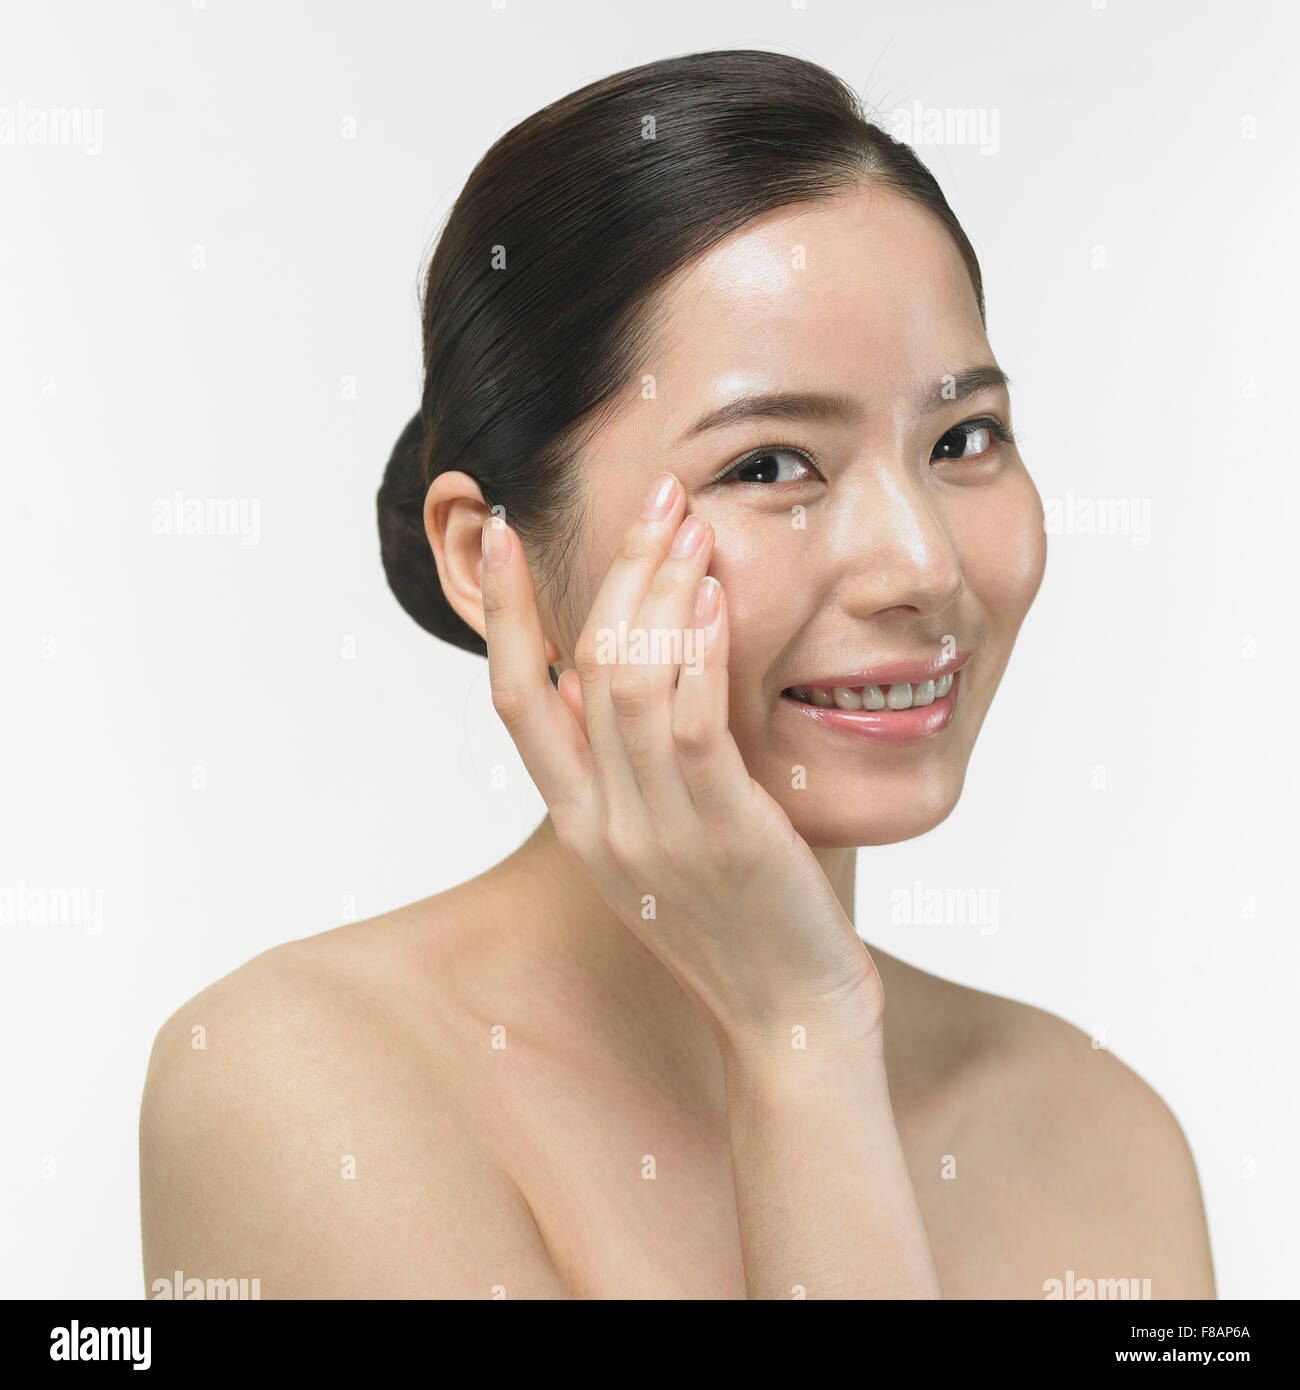 Portrait of Korean woman touching her face with a hand staring at front with a big smile Stock Photo